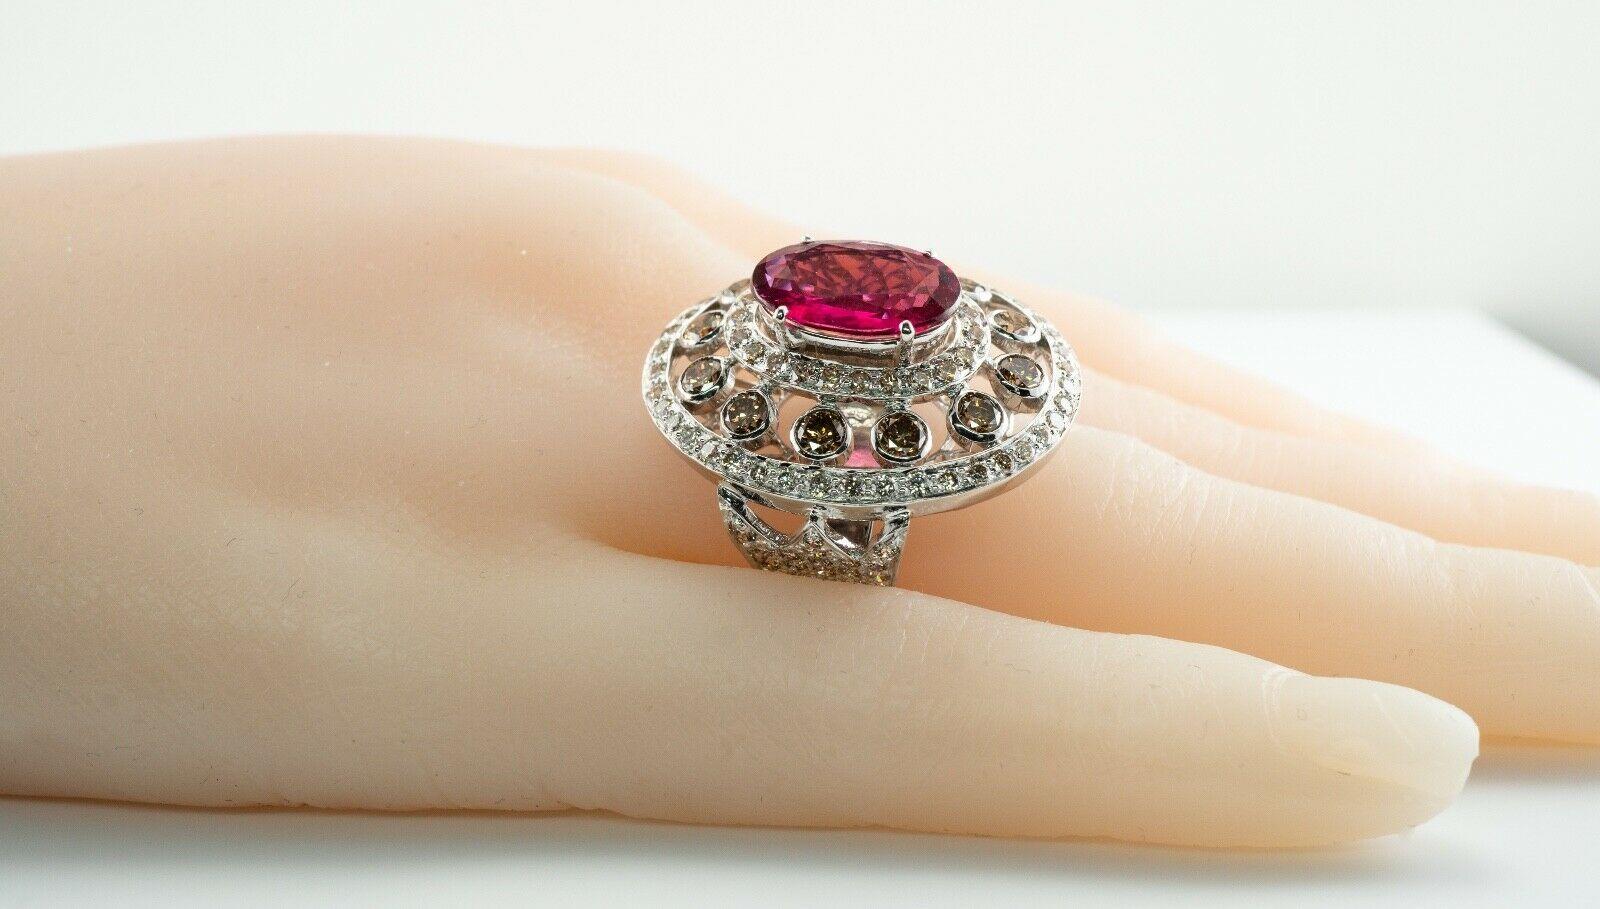 Diamond Rubellite Pink Tourmaline Ring Oval 18K White Gold For Sale 4